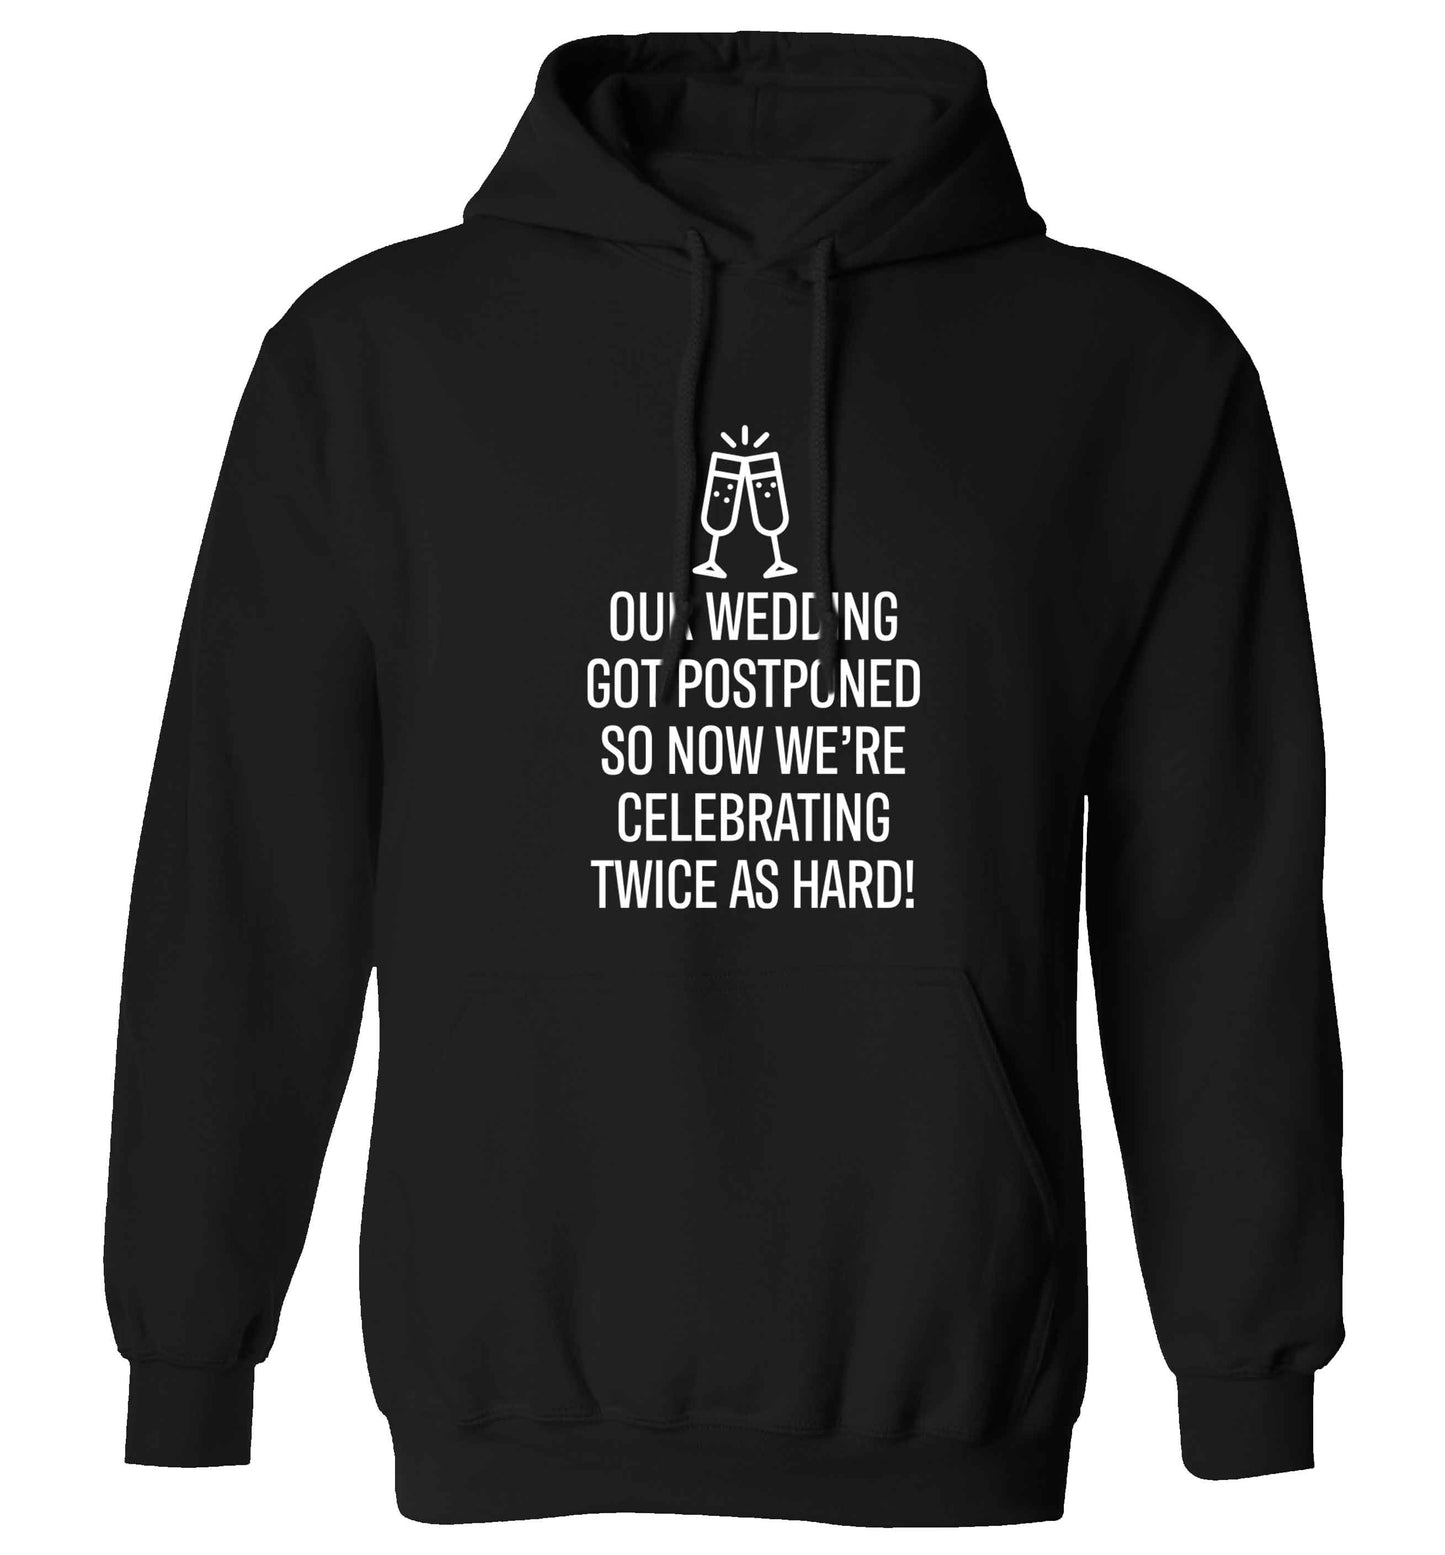 Postponed wedding? Sounds like an excuse to party twice as hard!  adults unisex black hoodie 2XL